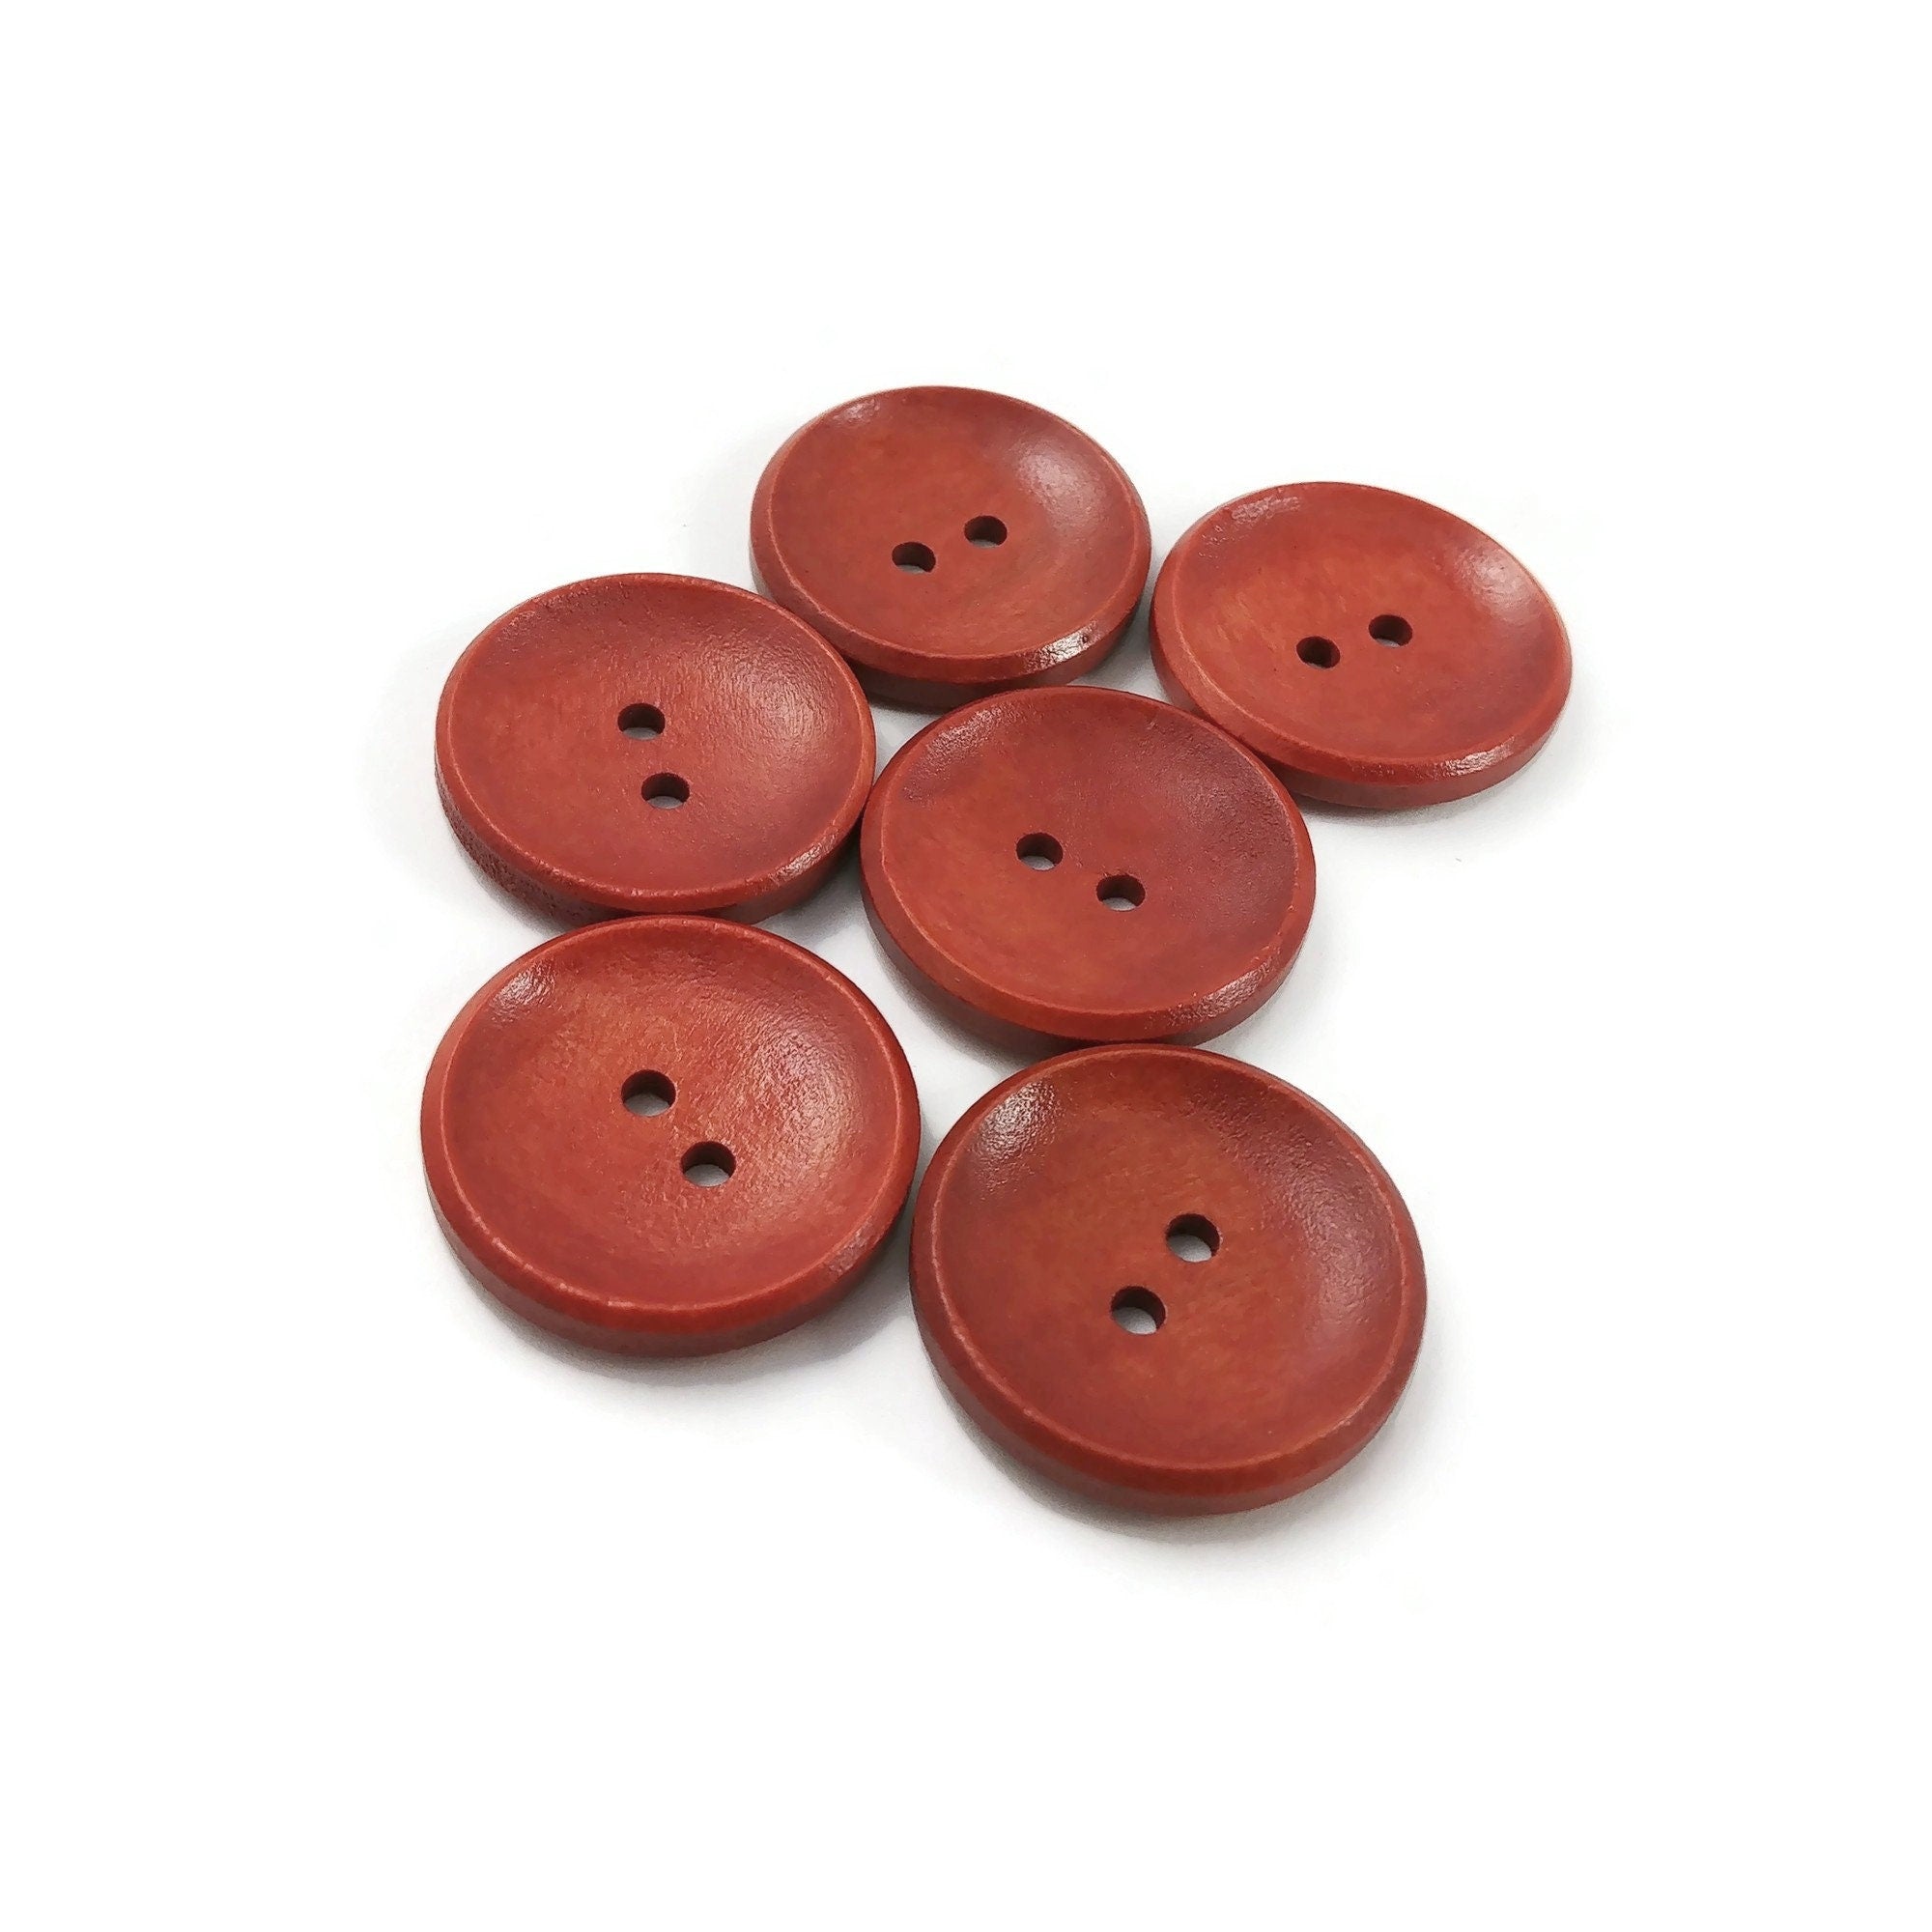 30 Pcs 30mm Wooden Buttons 1.18 inches Premium Buttons for Sewing